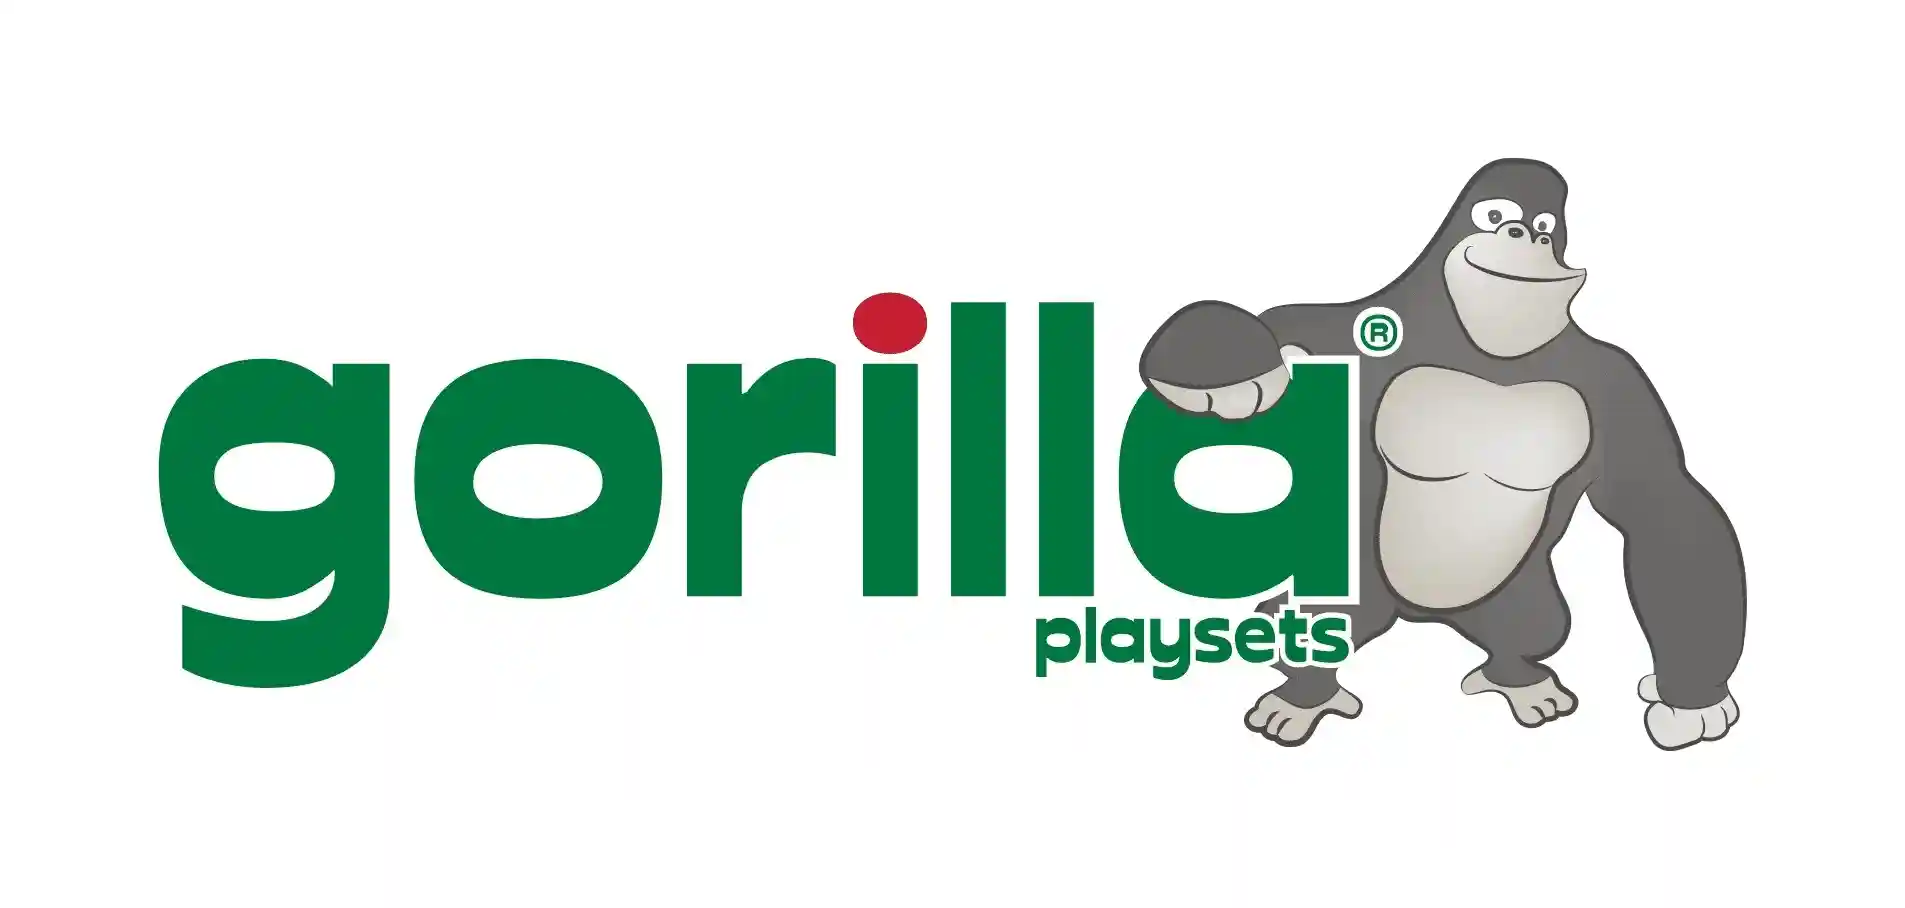 Save Up To 15% - Gorilla Playsets Special Offer With All Online Orderss